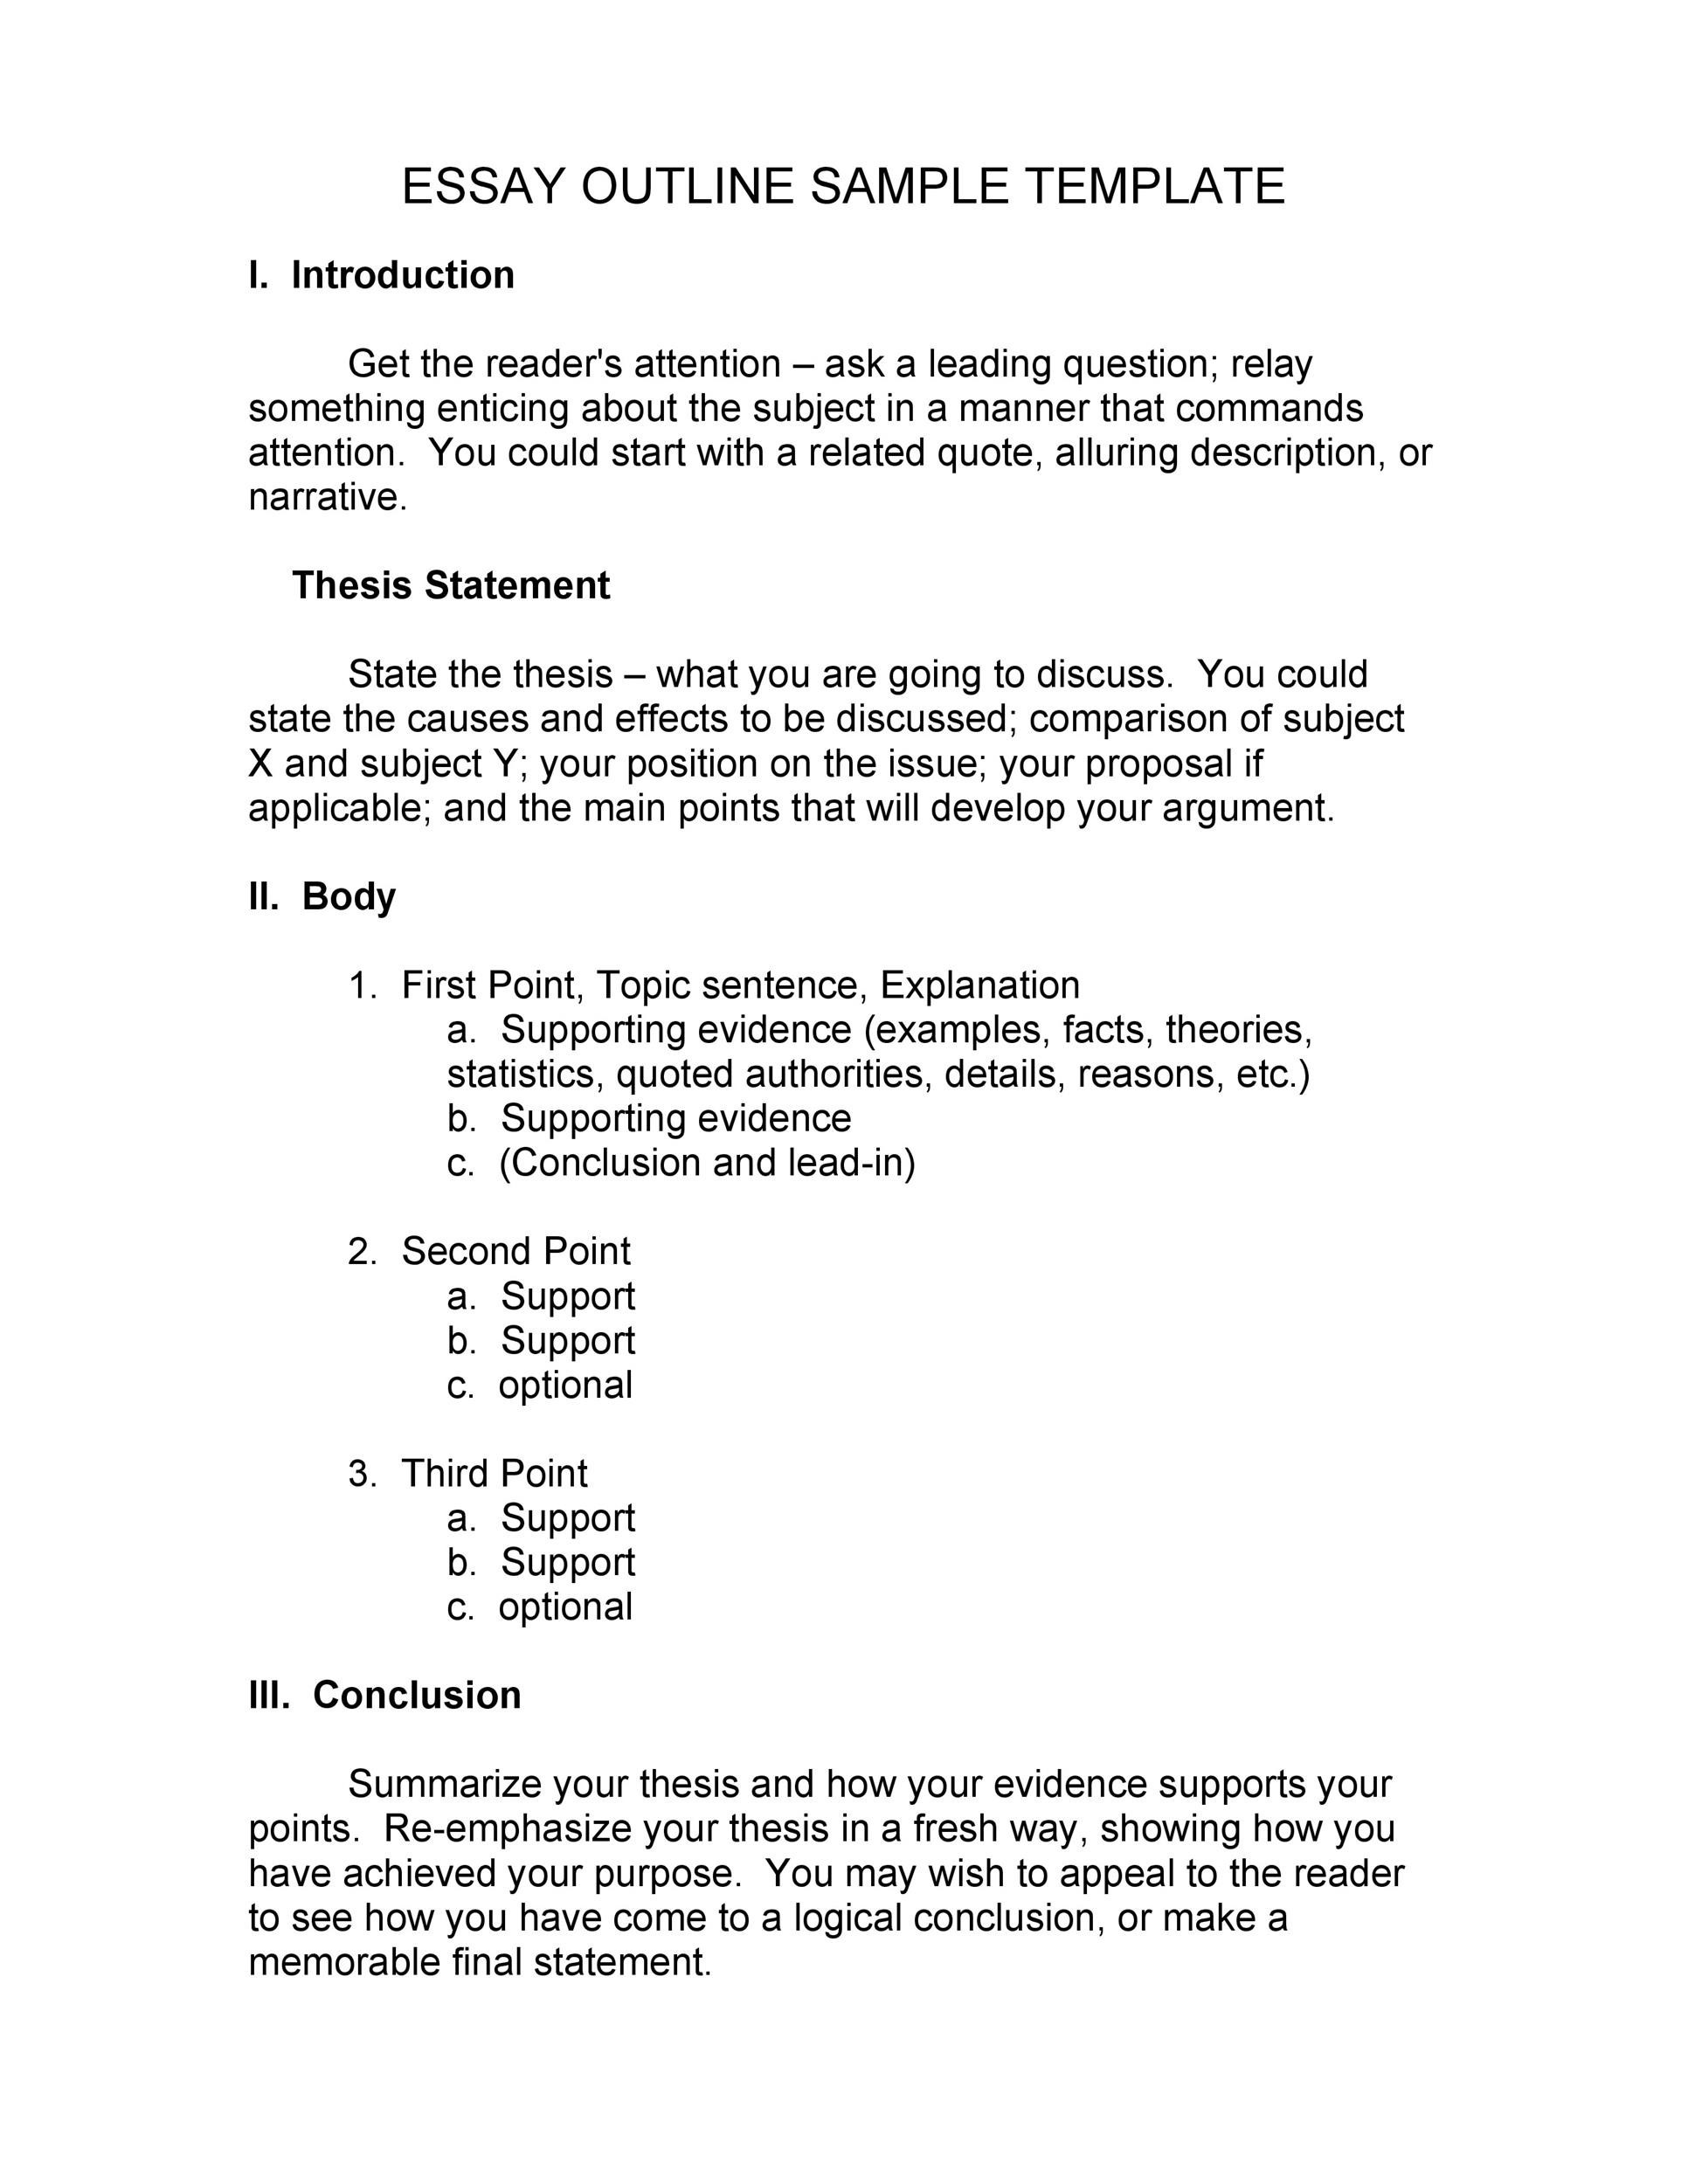 Personal Essay Outline Template - Important Things to ...